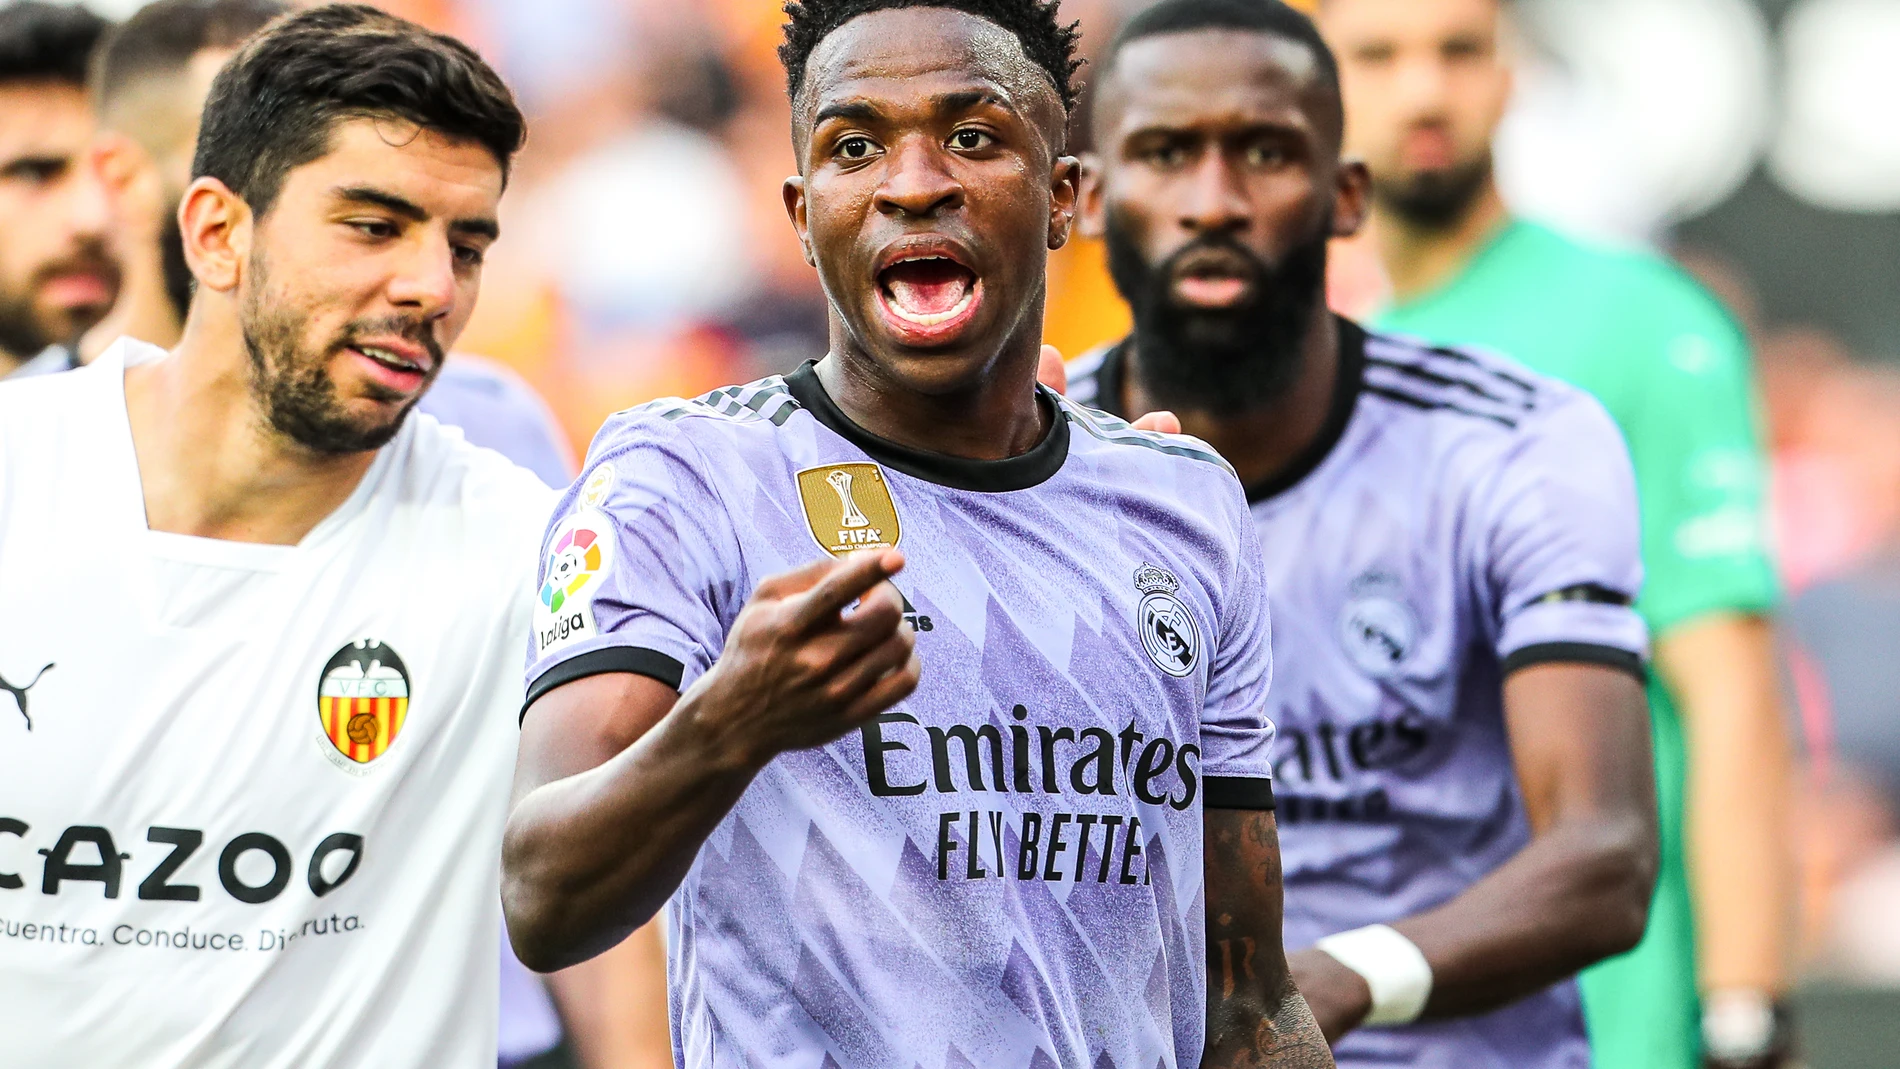 Vinicius Junior of Real Madrid protest during the spanish league, La Liga Santander, football match played between Valencia CF and Real Madrid at Mestalla stadium on May 21, 2023, in Valencia, Spain.
Ivan Terron / Afp7 
21/05/2023 ONLY FOR USE IN SPAIN